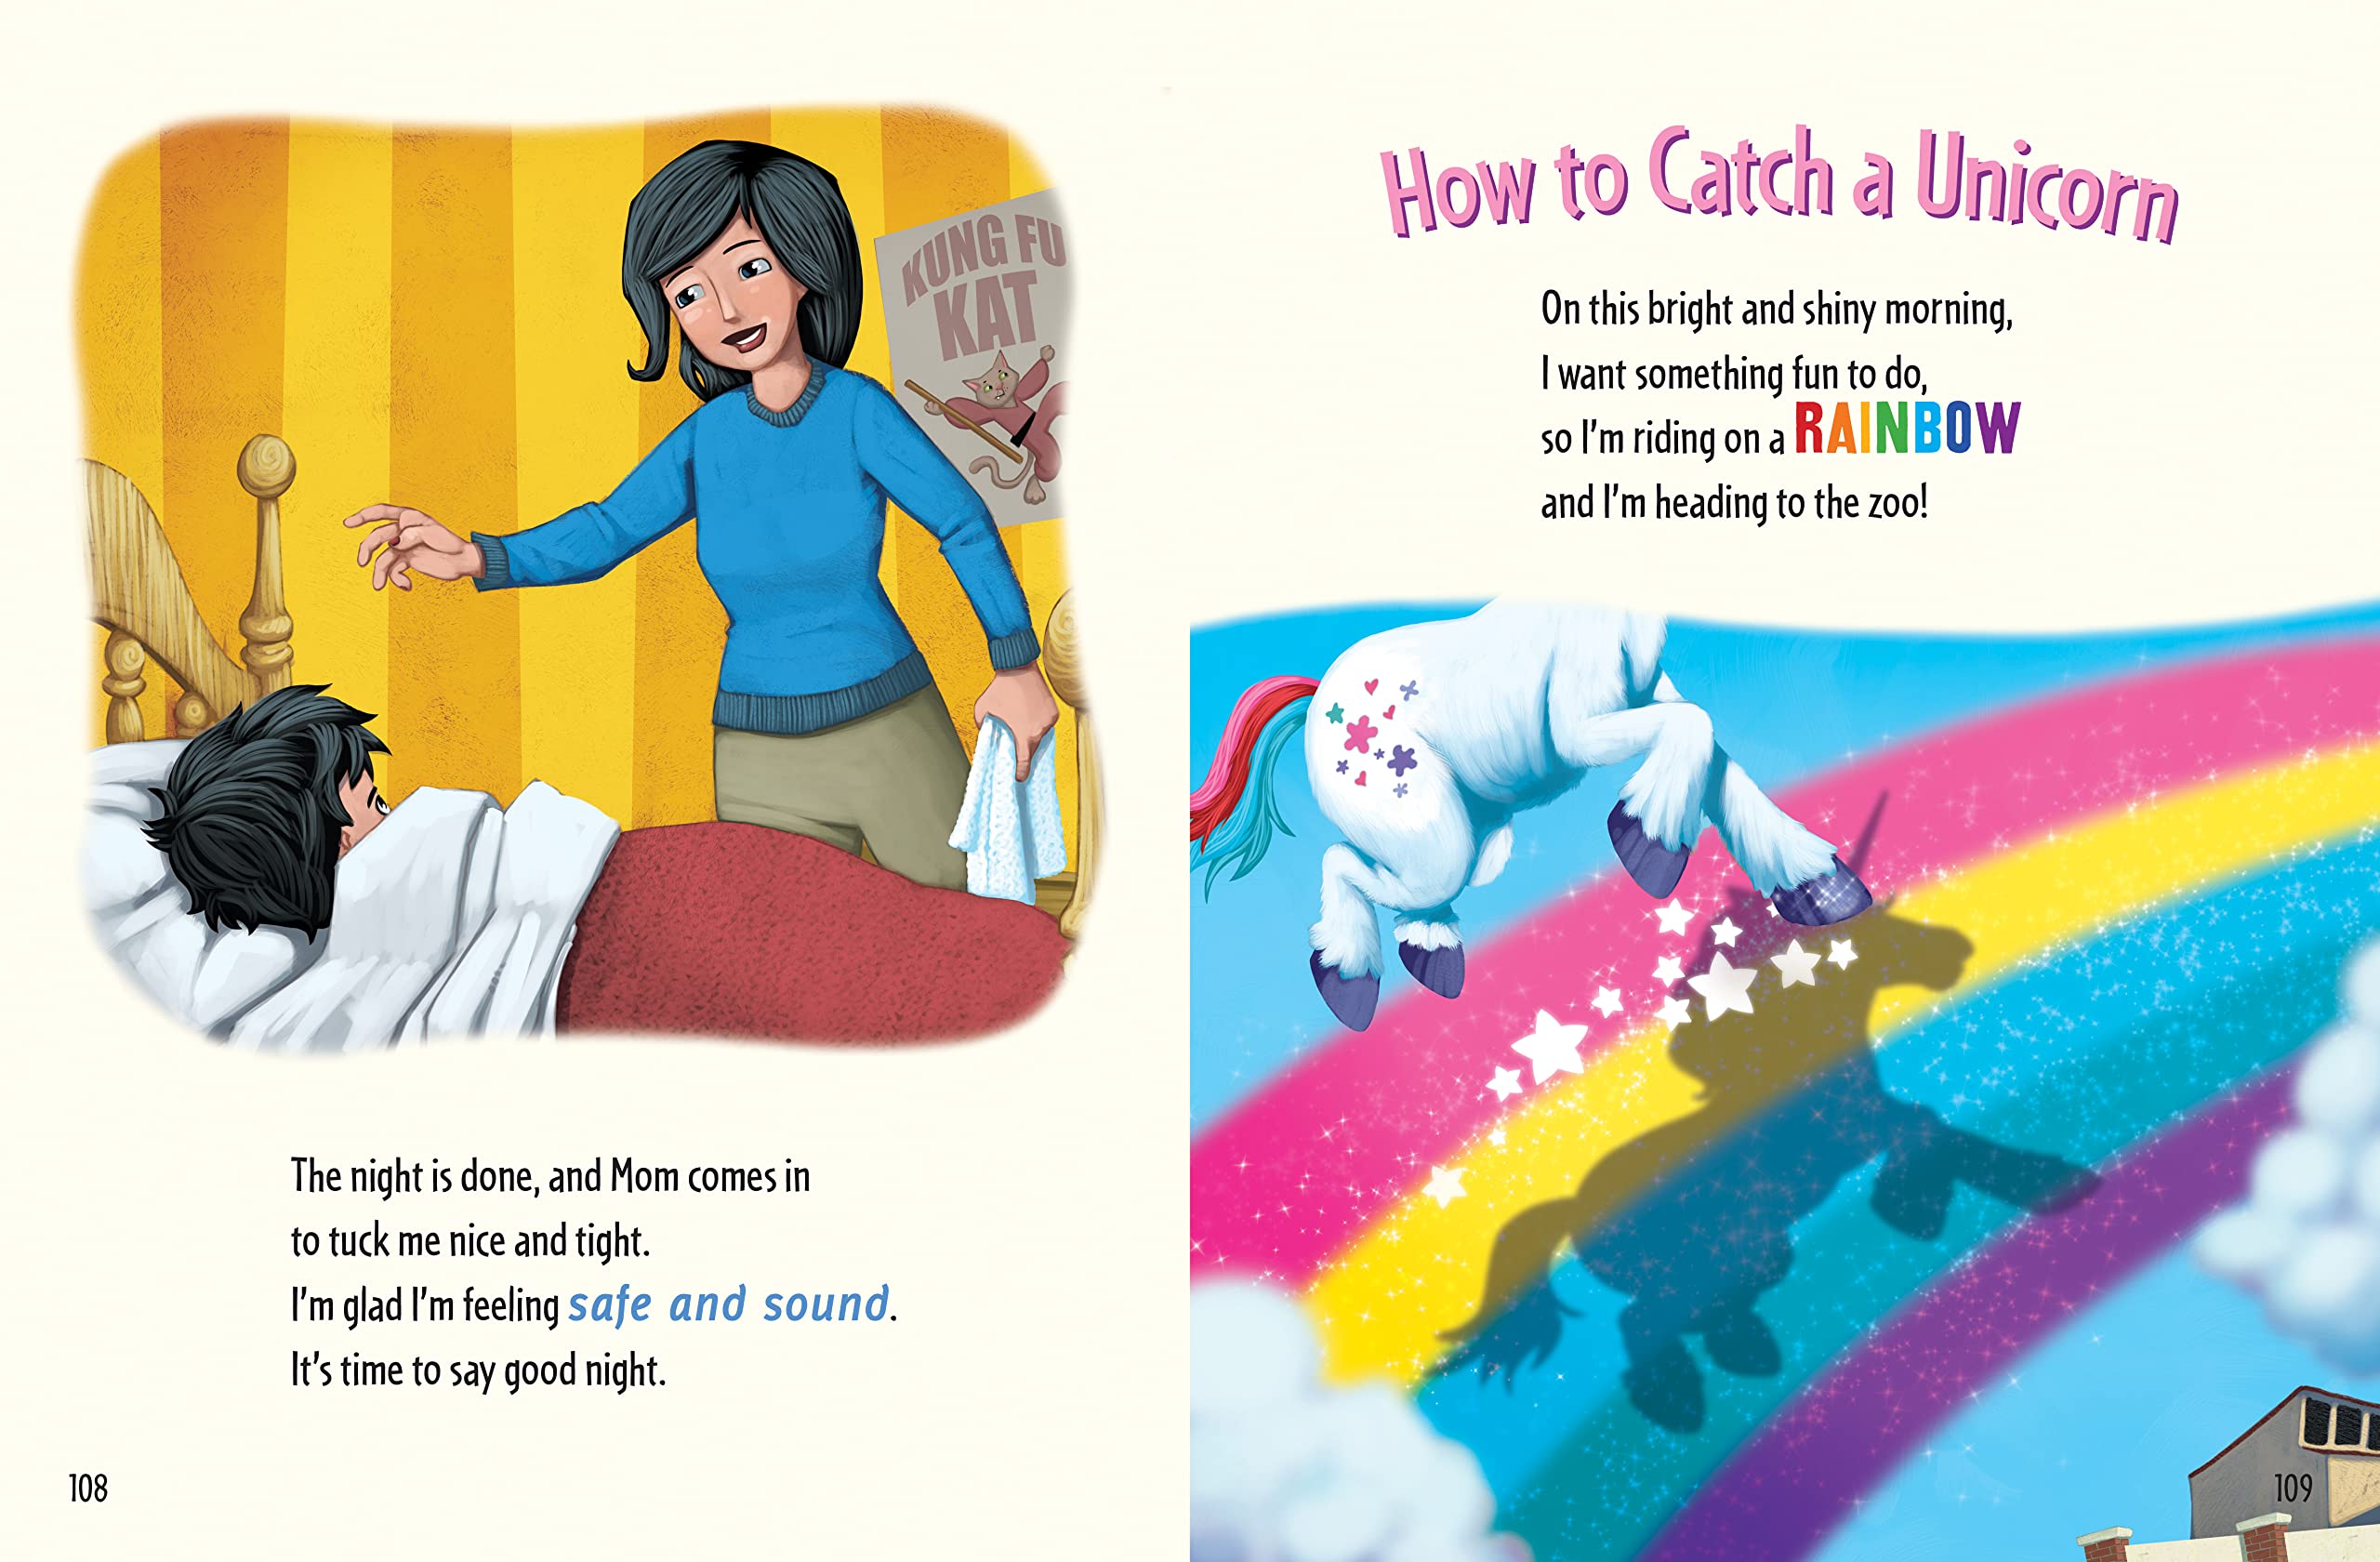 5-Minute How to Catch Stories: 12 Magical Adventures in One Storybook Collection for Kids!